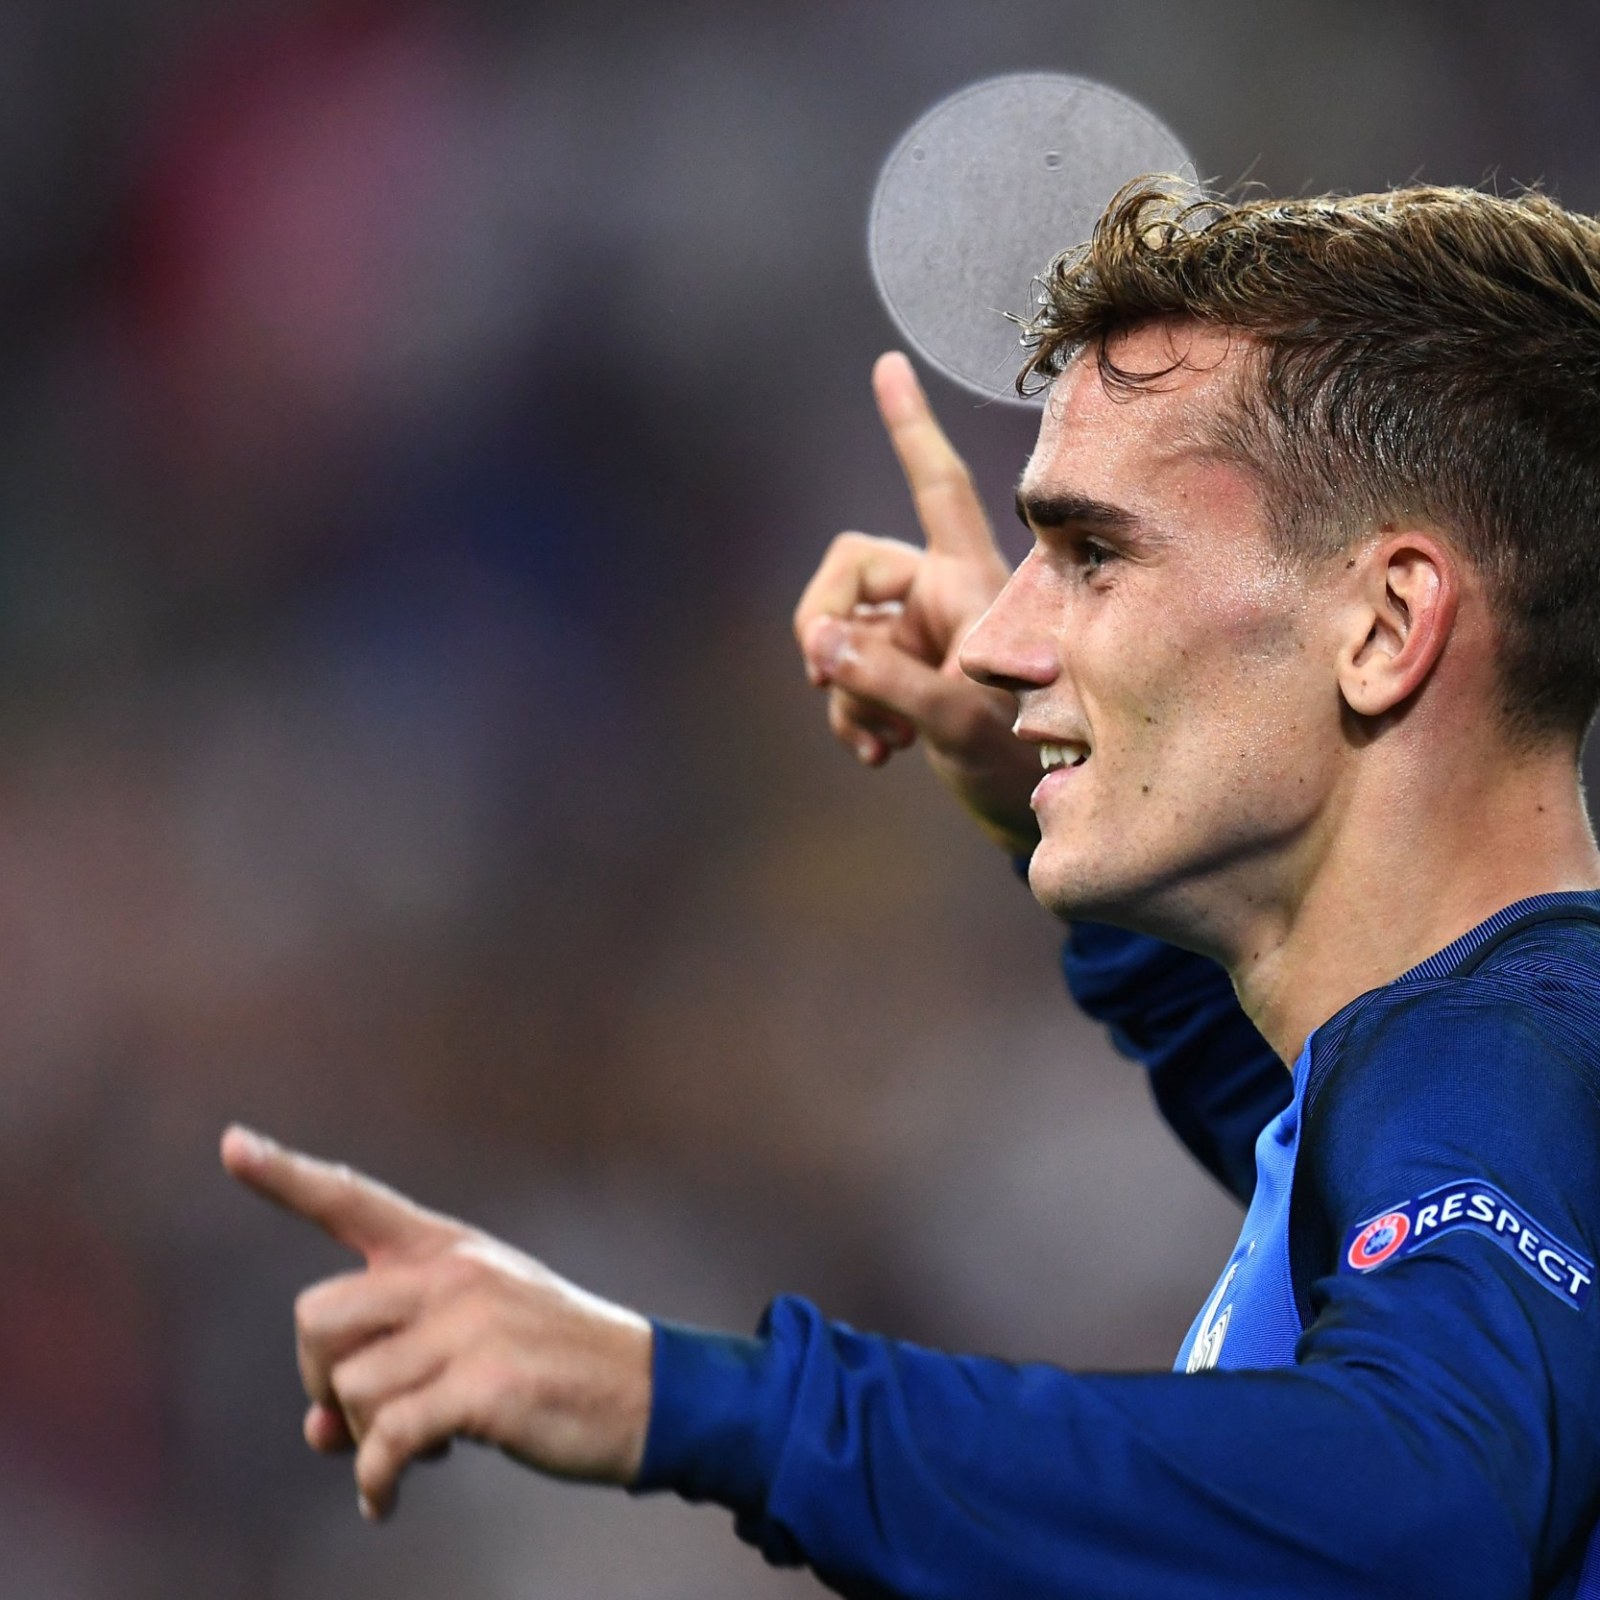 Antoine Griezmann: Who Is the Star of UEFA Euro 2016?